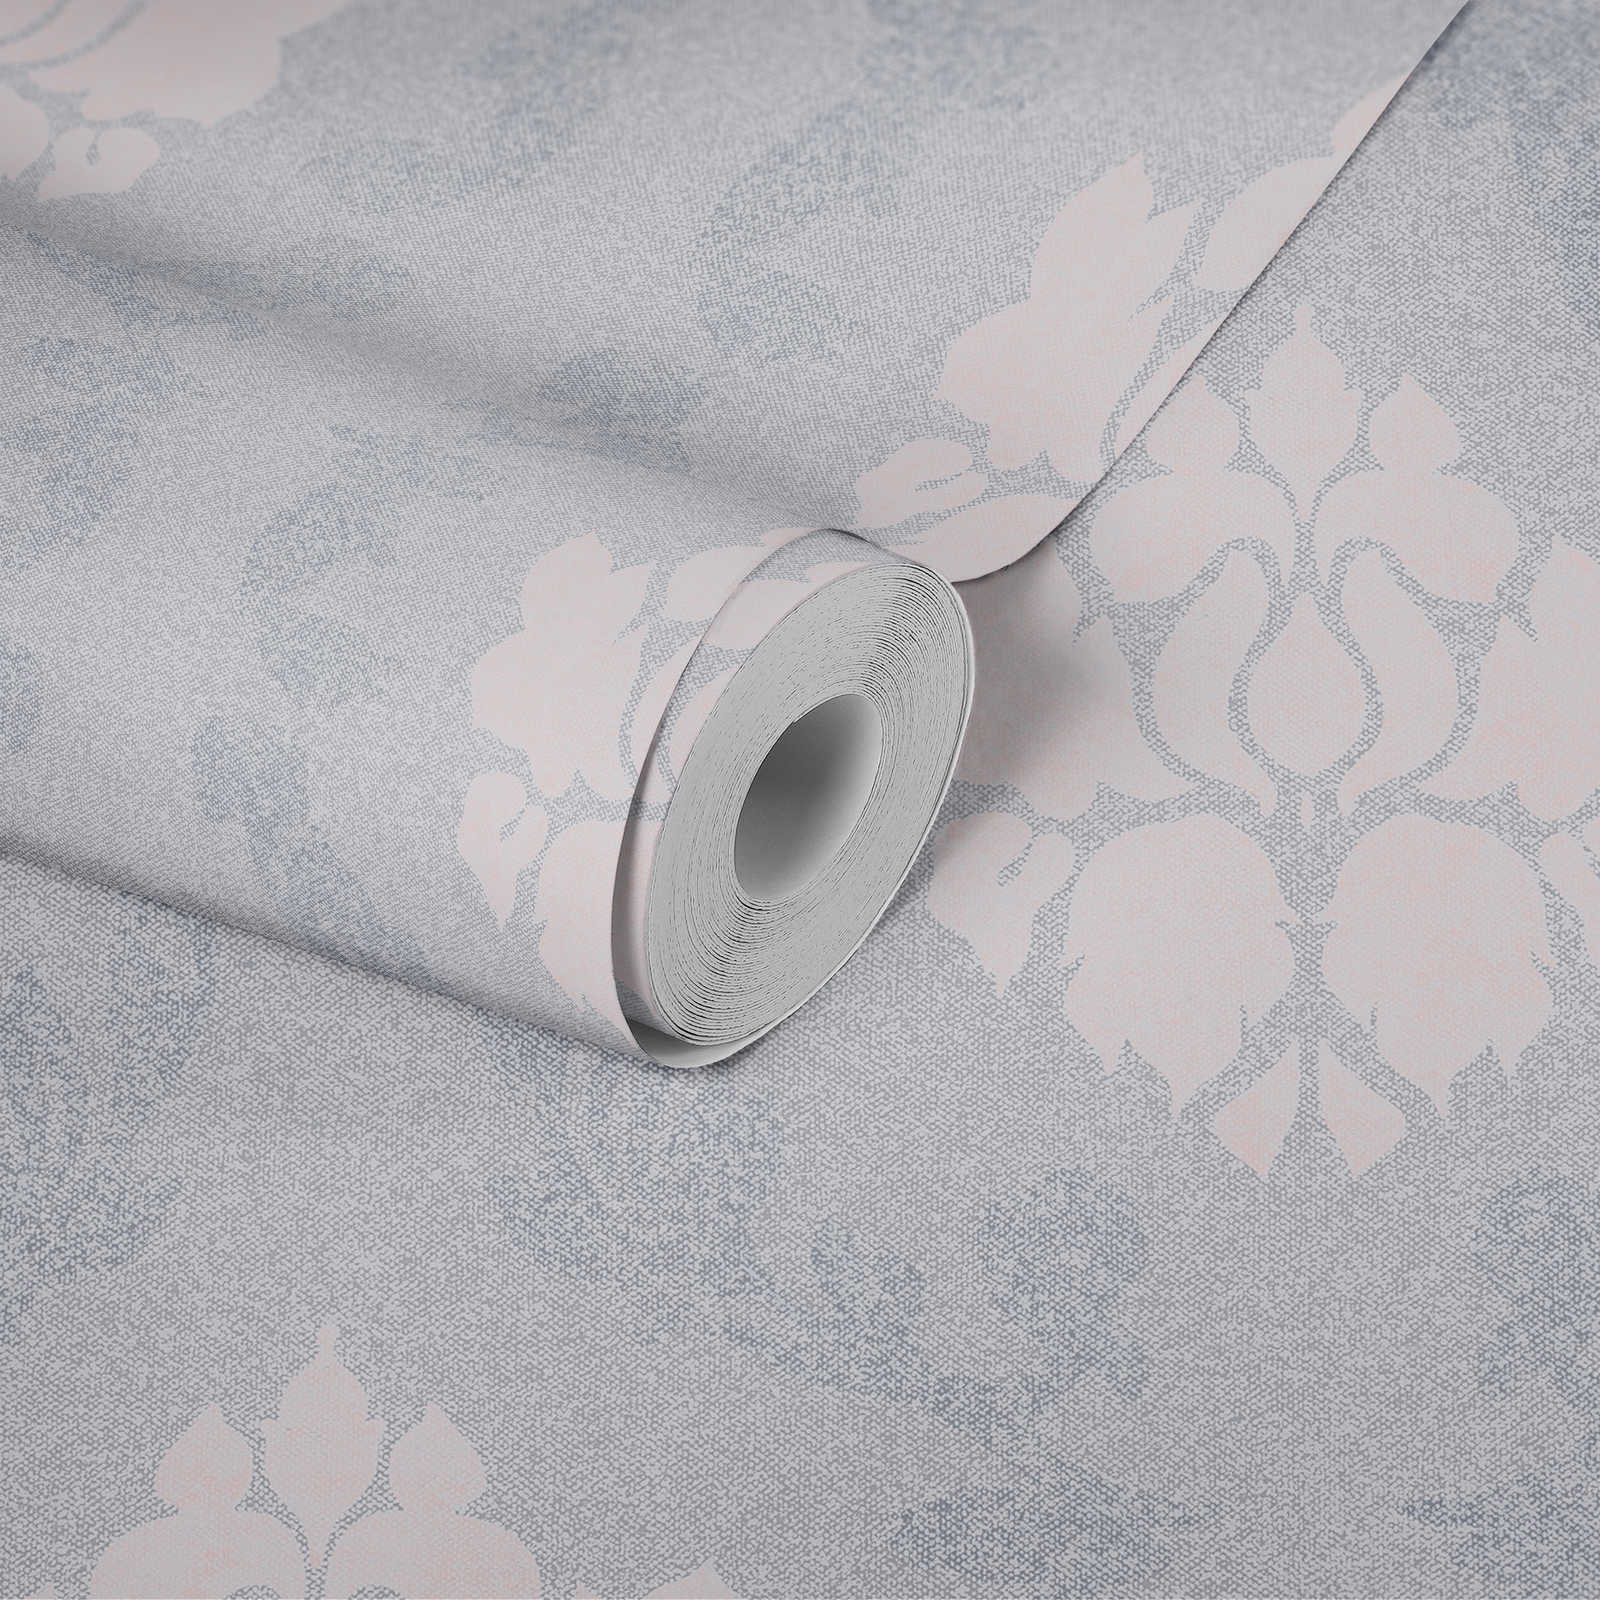             Ornament wallpaper with linen look - blue, pink
        